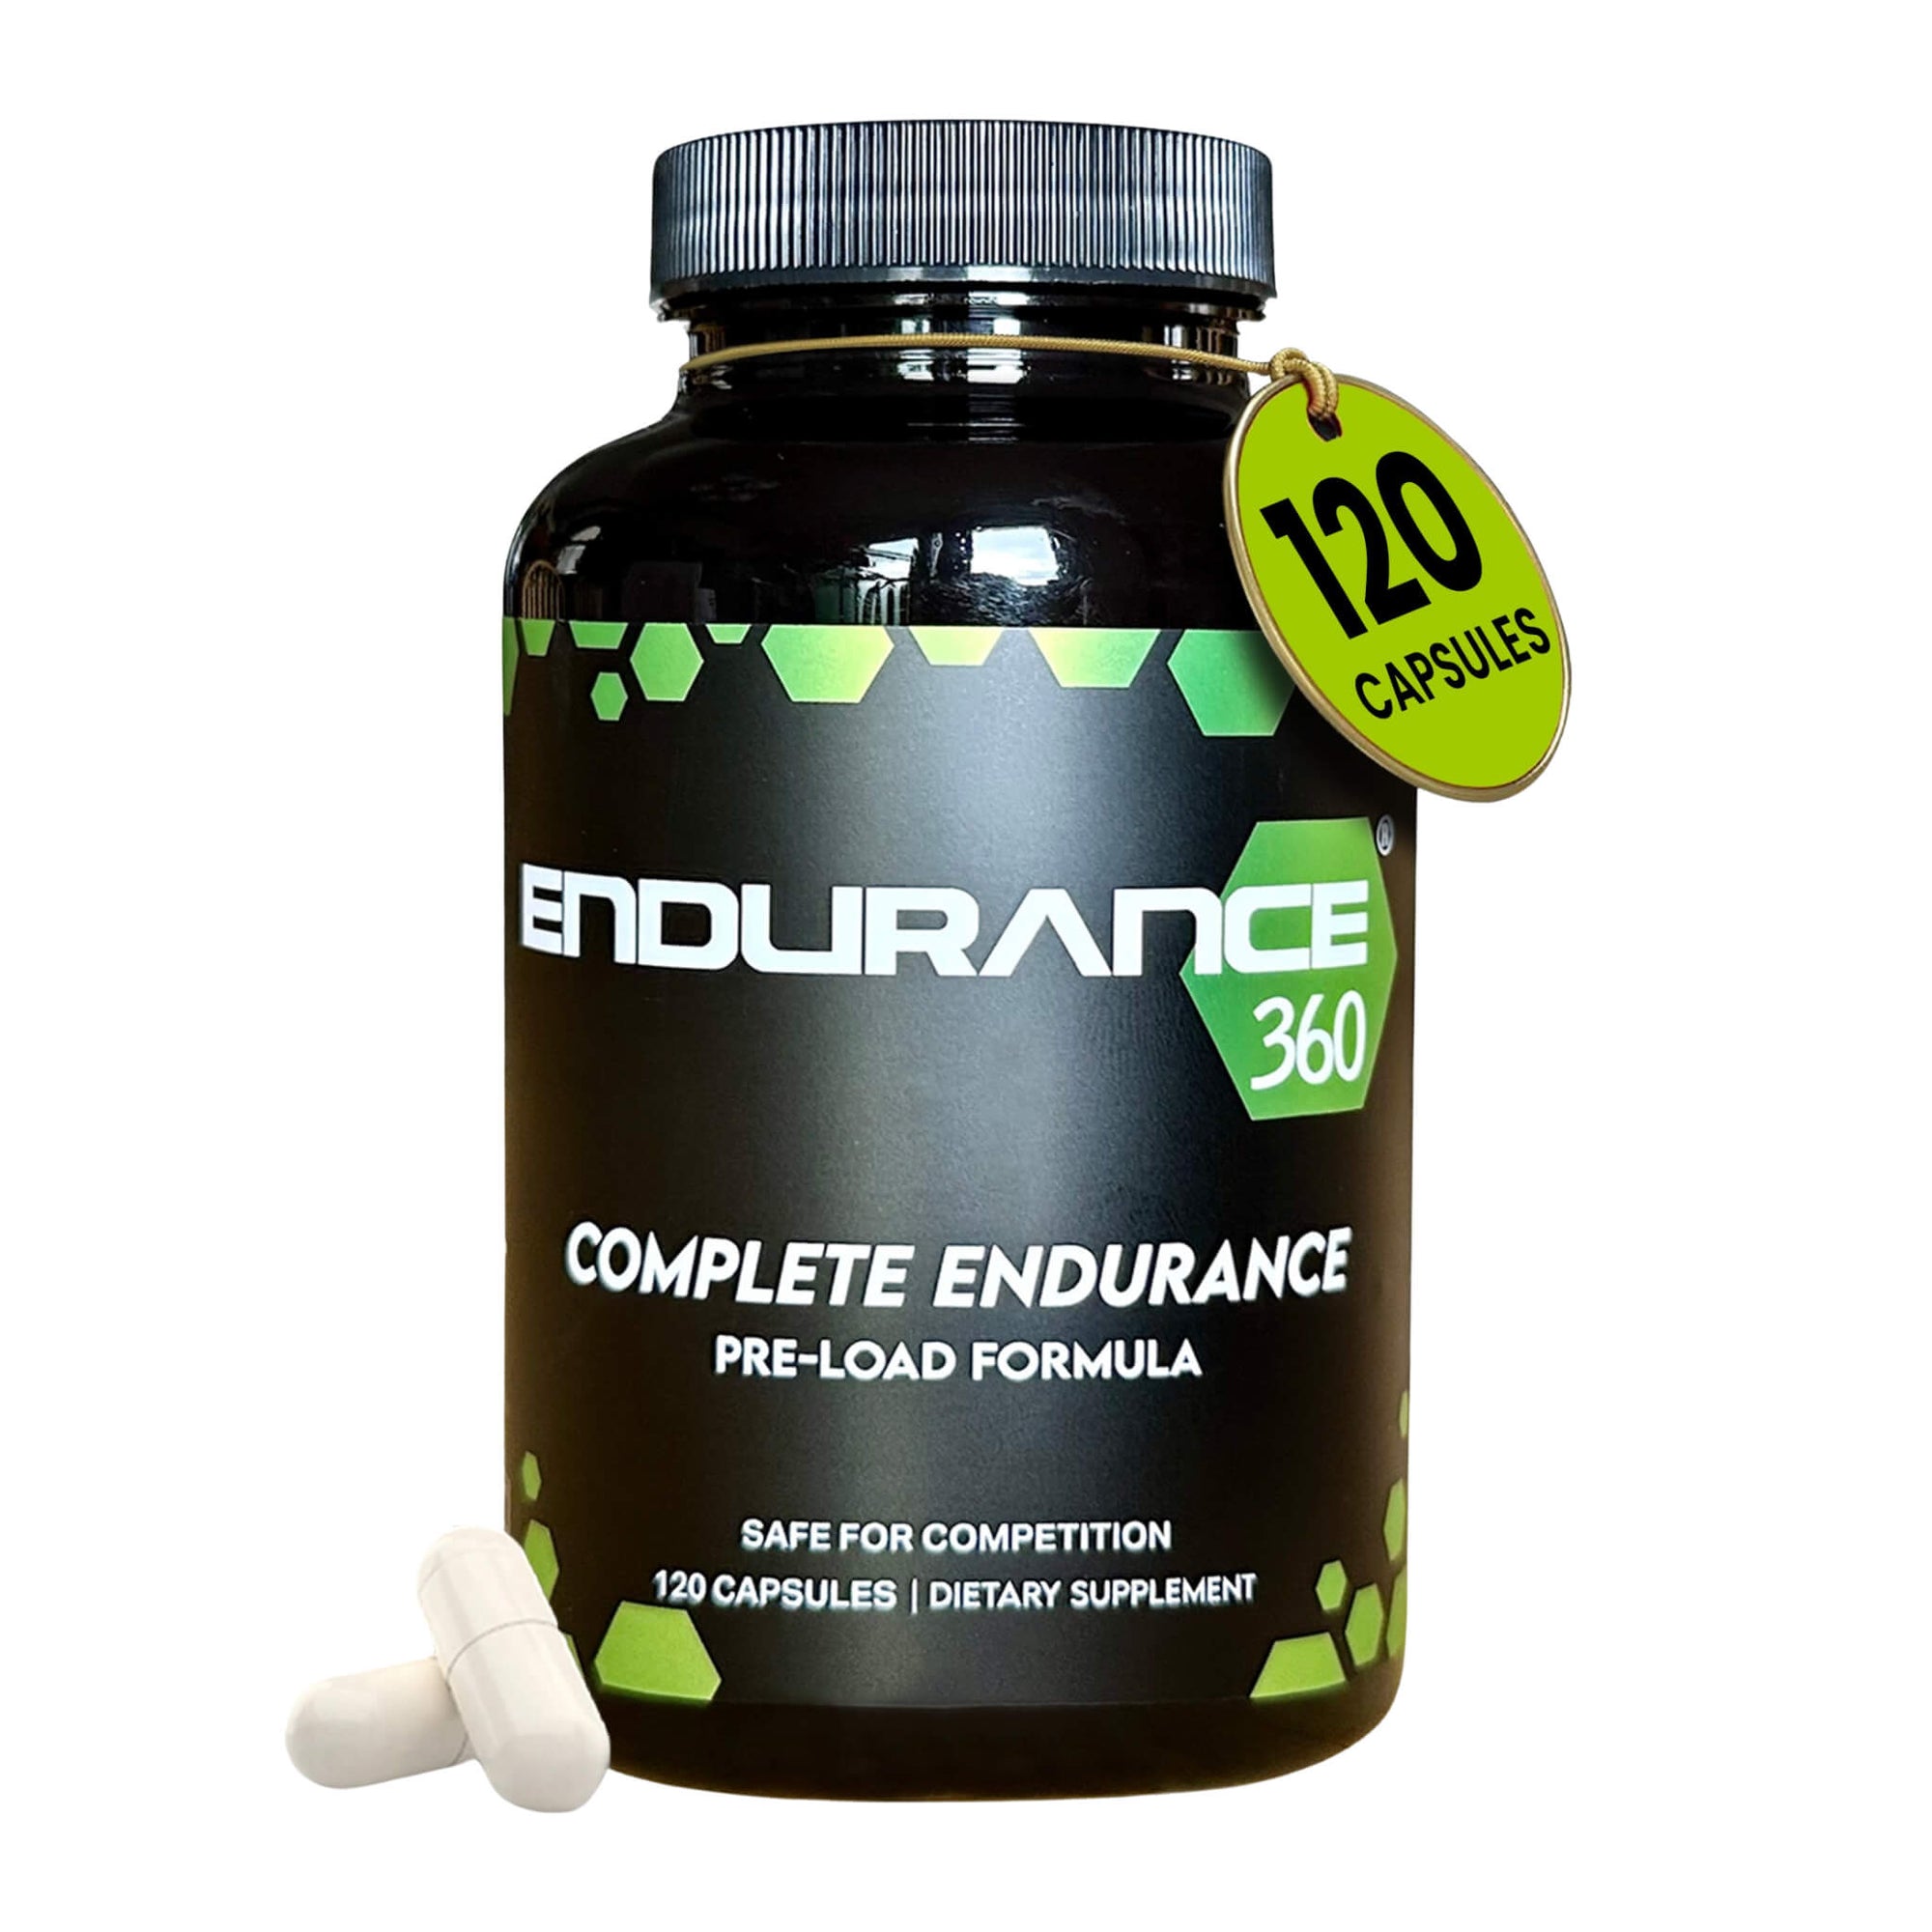 Endurance360® Complete Pre-Loading for Muscle Endurance, Recovery and Leg Cramps